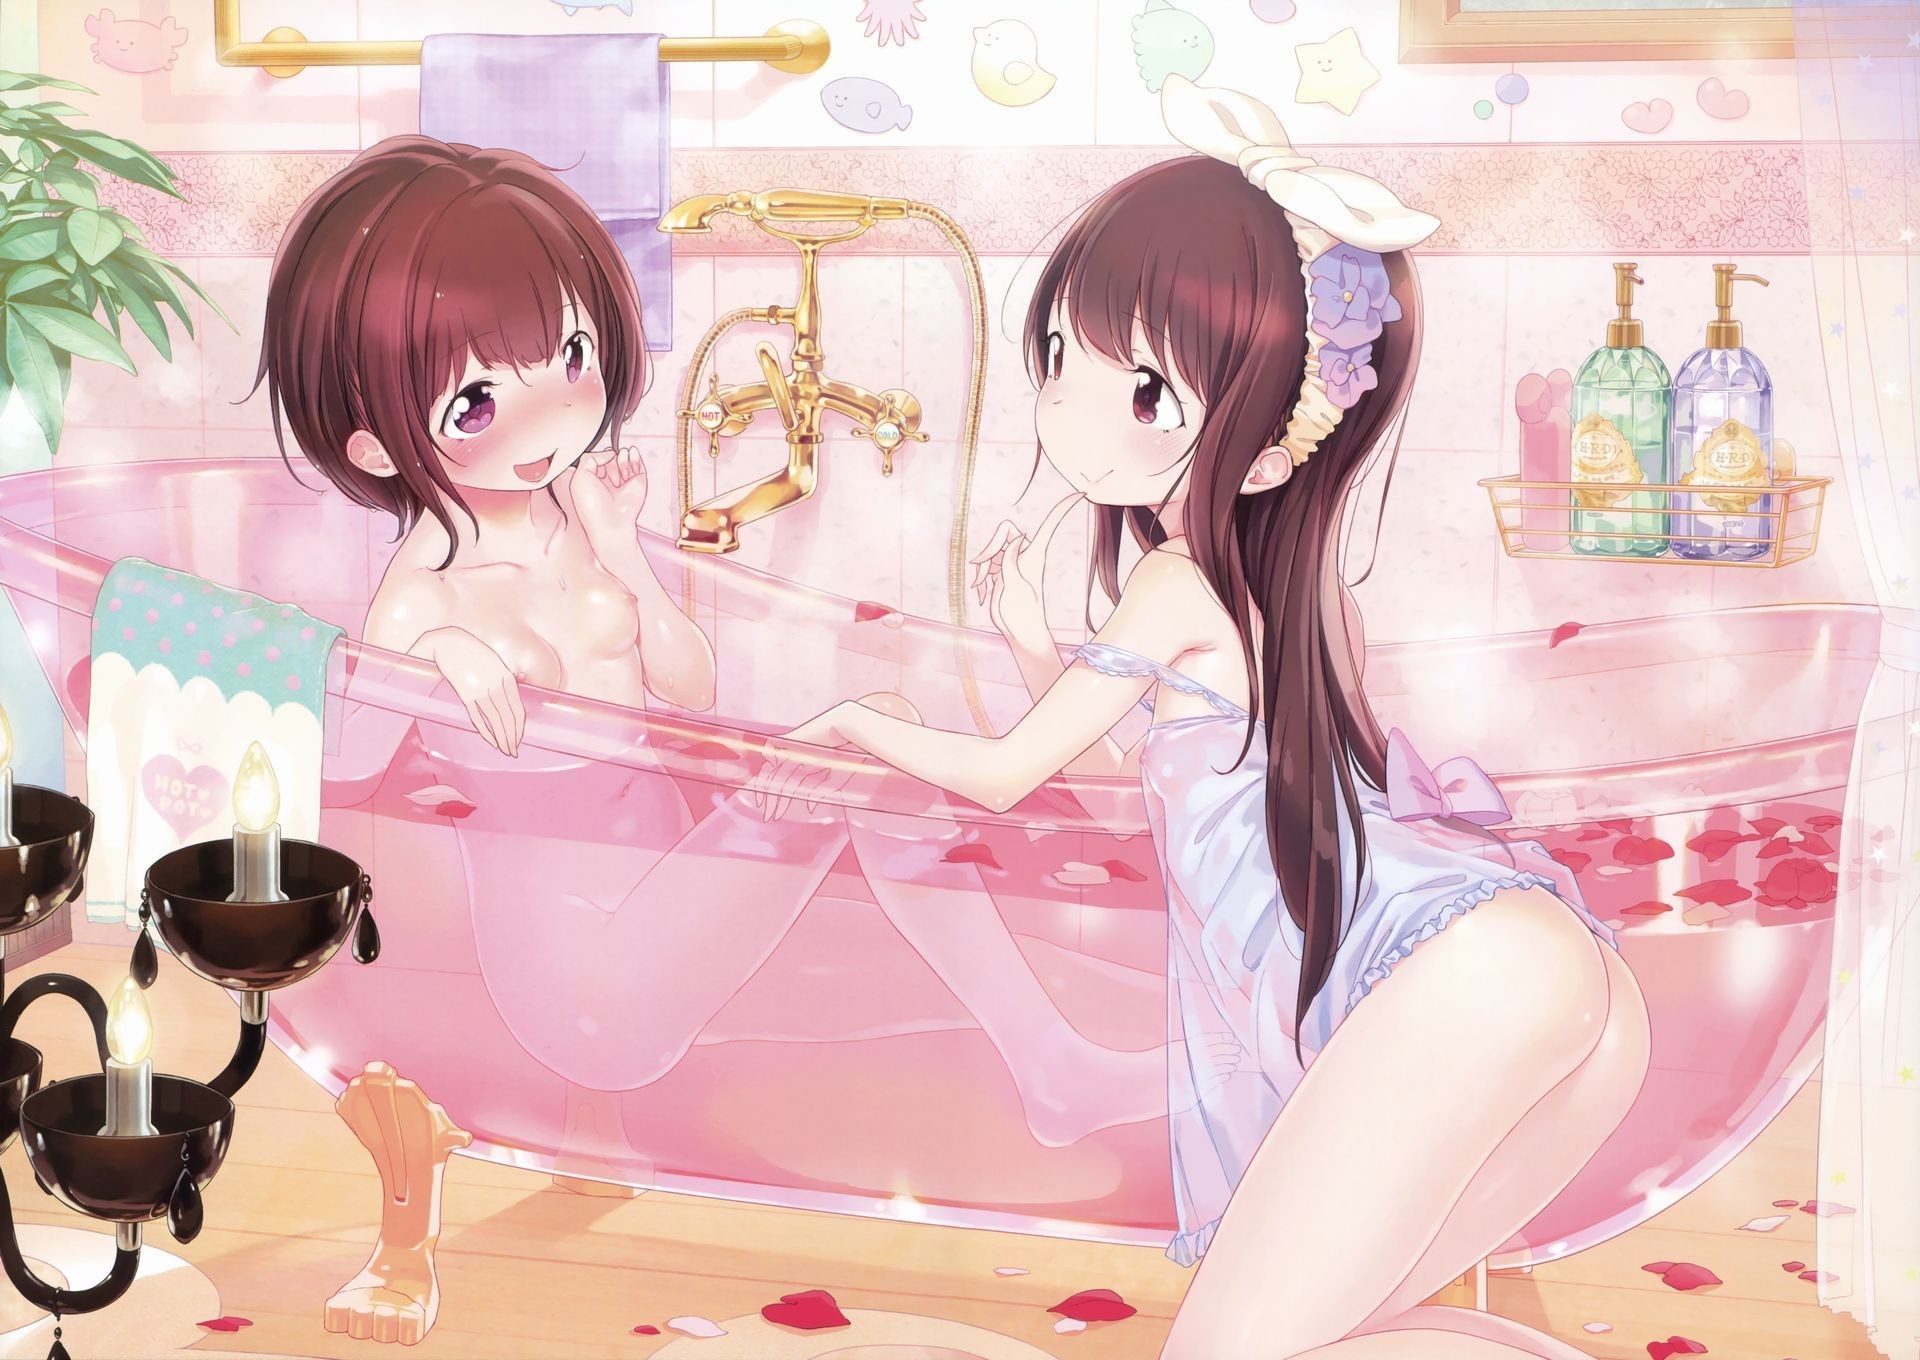 Free Amatuer Two-dimensional Erotic Image Feature That Collected The Bathing Scene Of The Beautiful Girl Who Comes To Want To Take A Bath Together Unintentionally Young Petite Porn